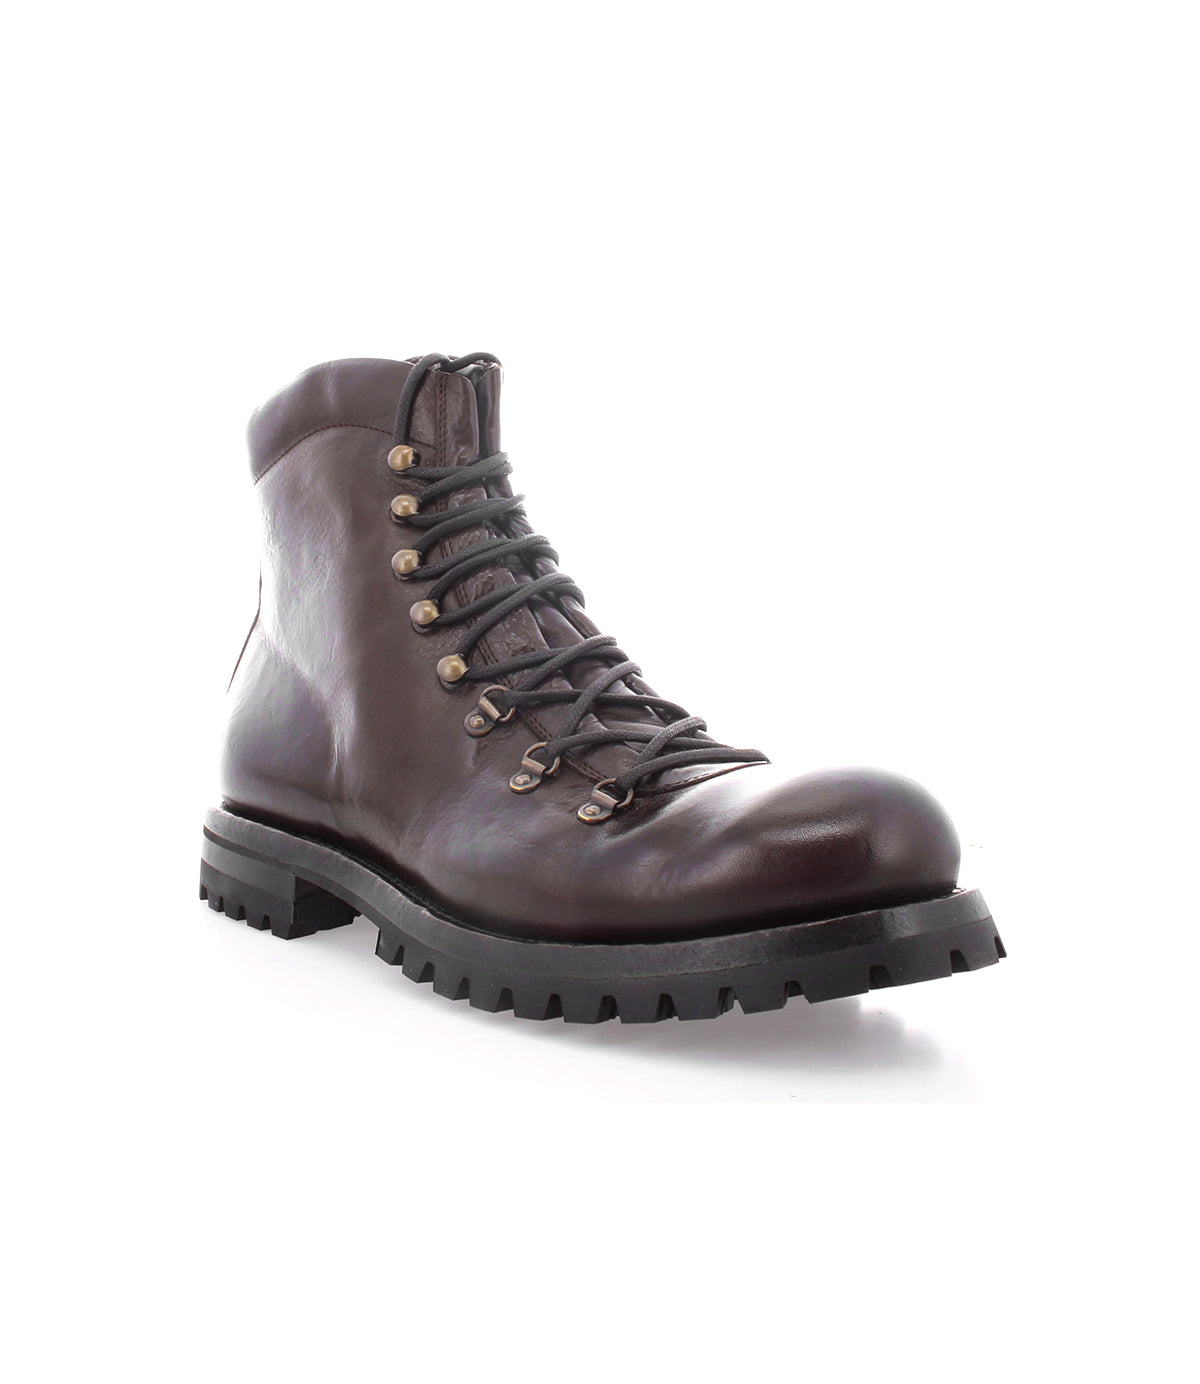 A durable men's Barge leather boot on a white background by Bed Stu.